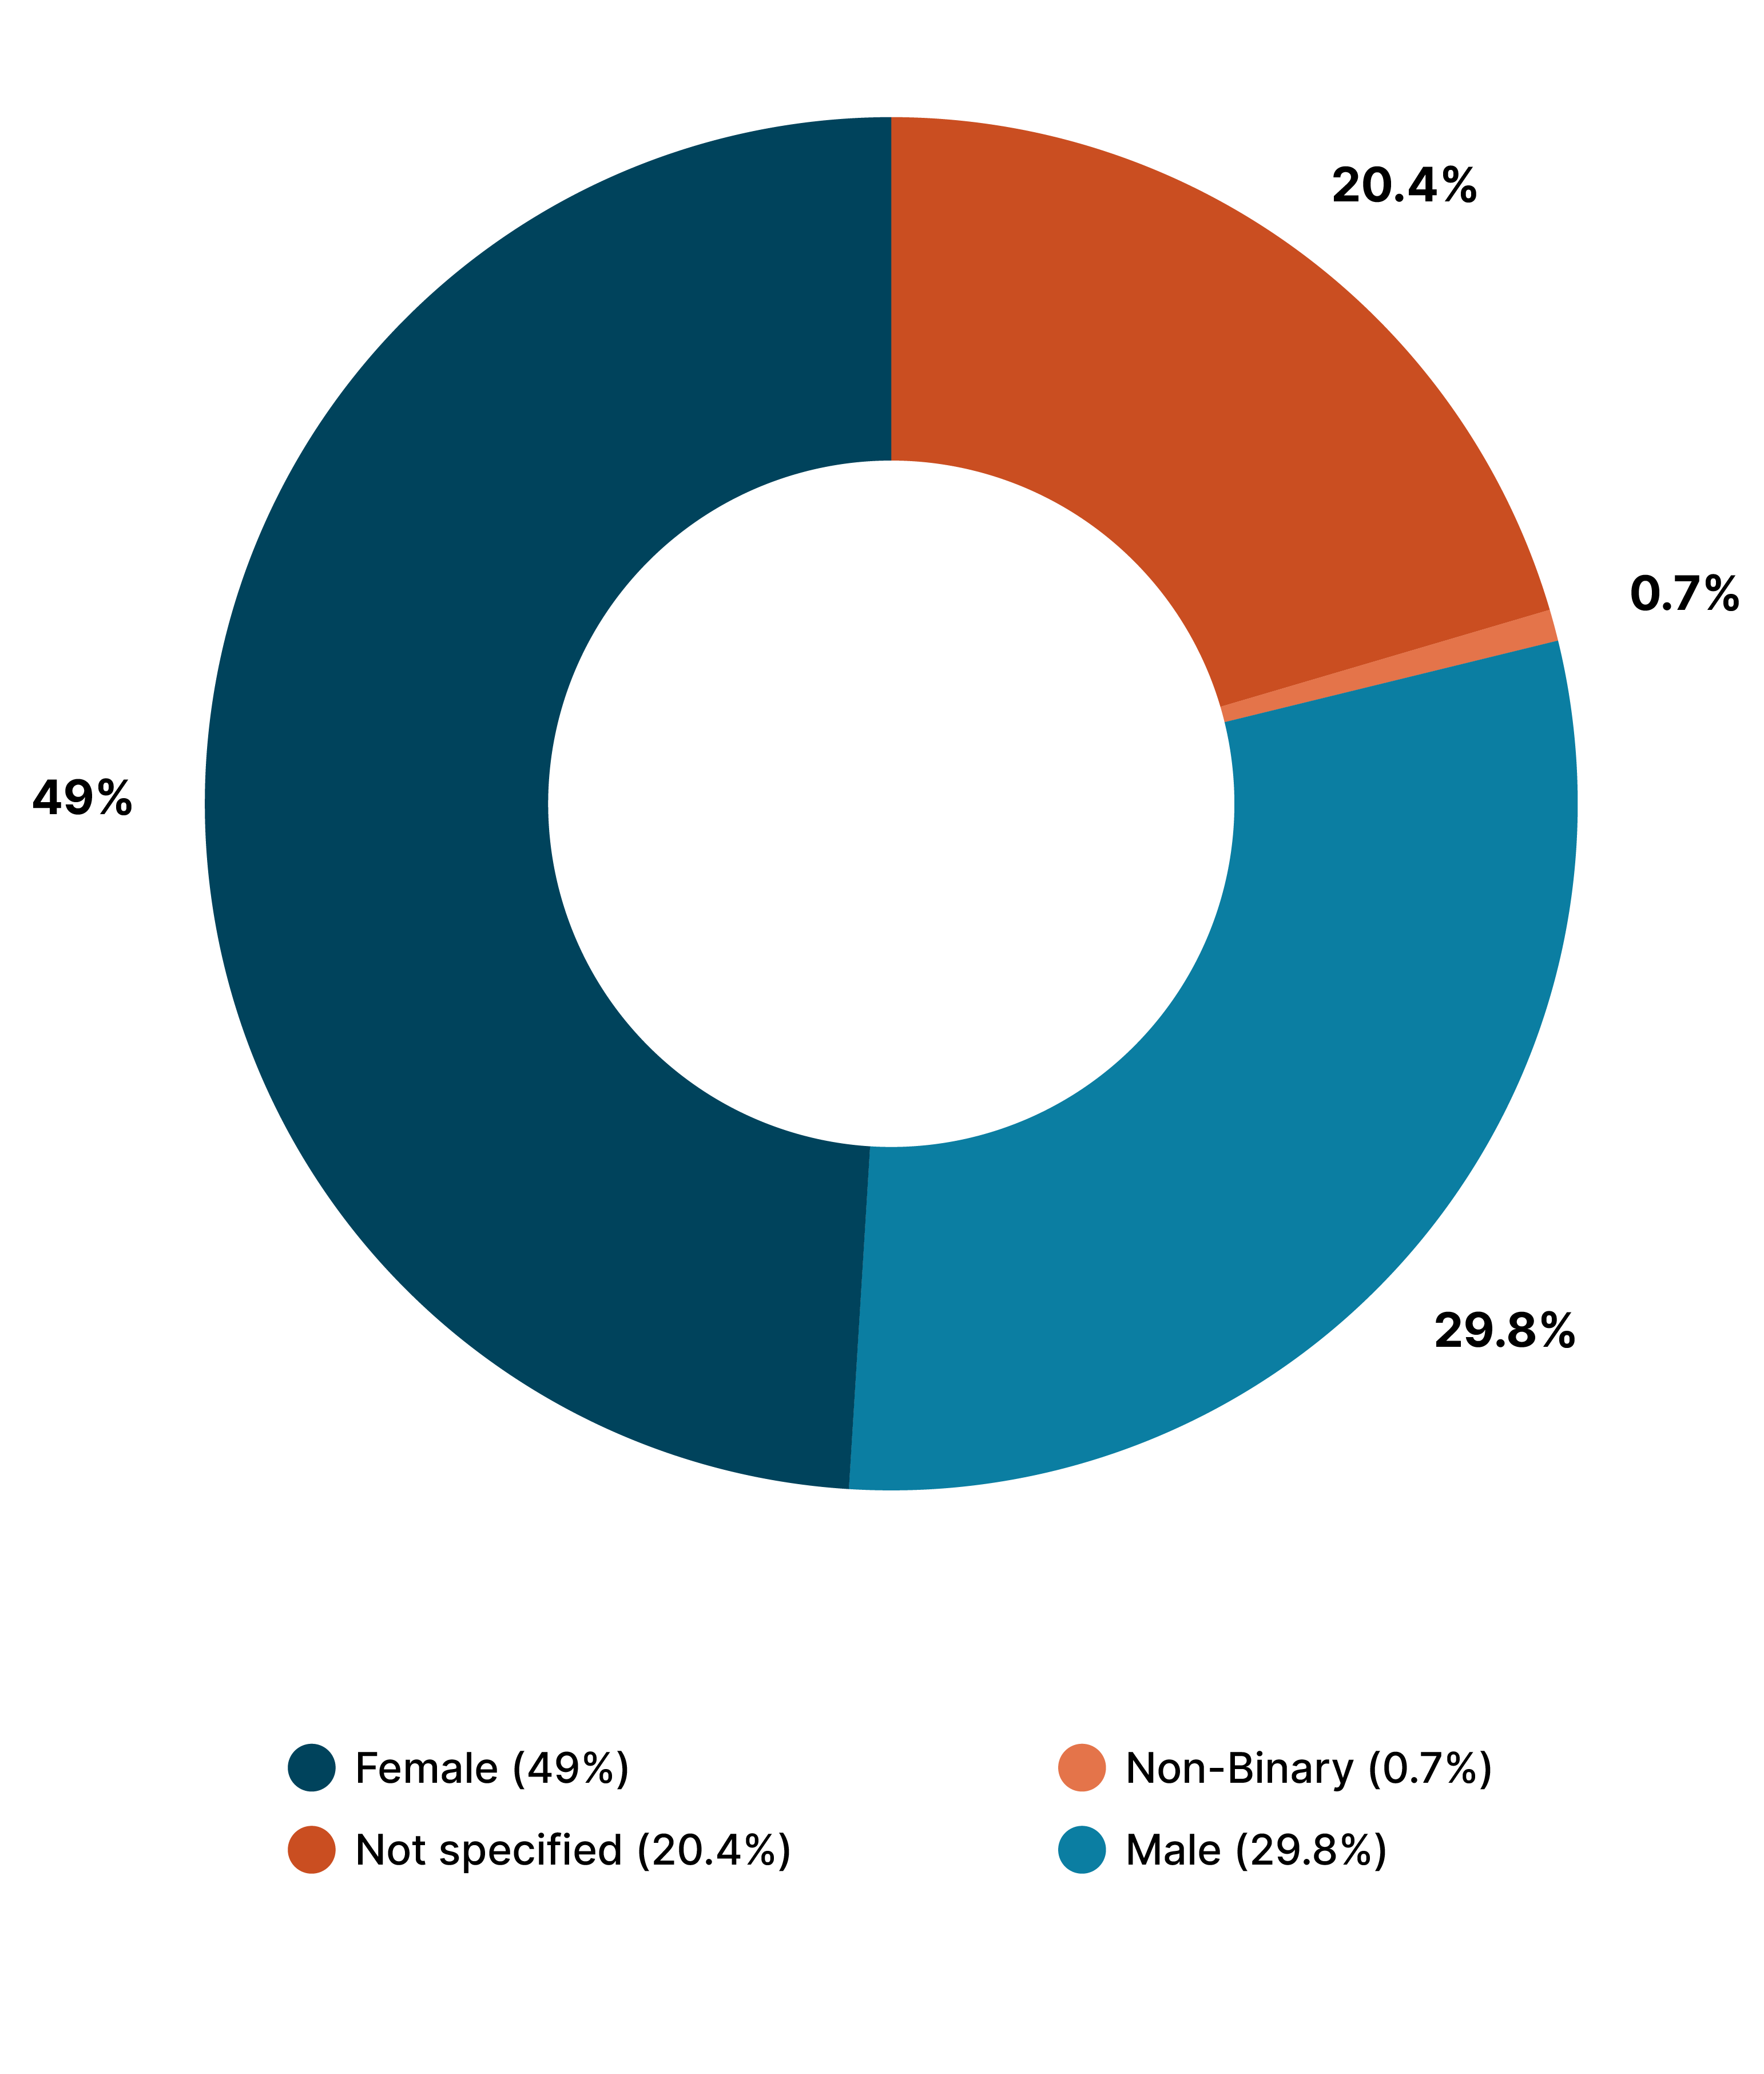 A pie chart depicting gender at Noodle; 49% Female, 20.4% Not specified, 0.7% Non-Binary, and 29.8% Male.